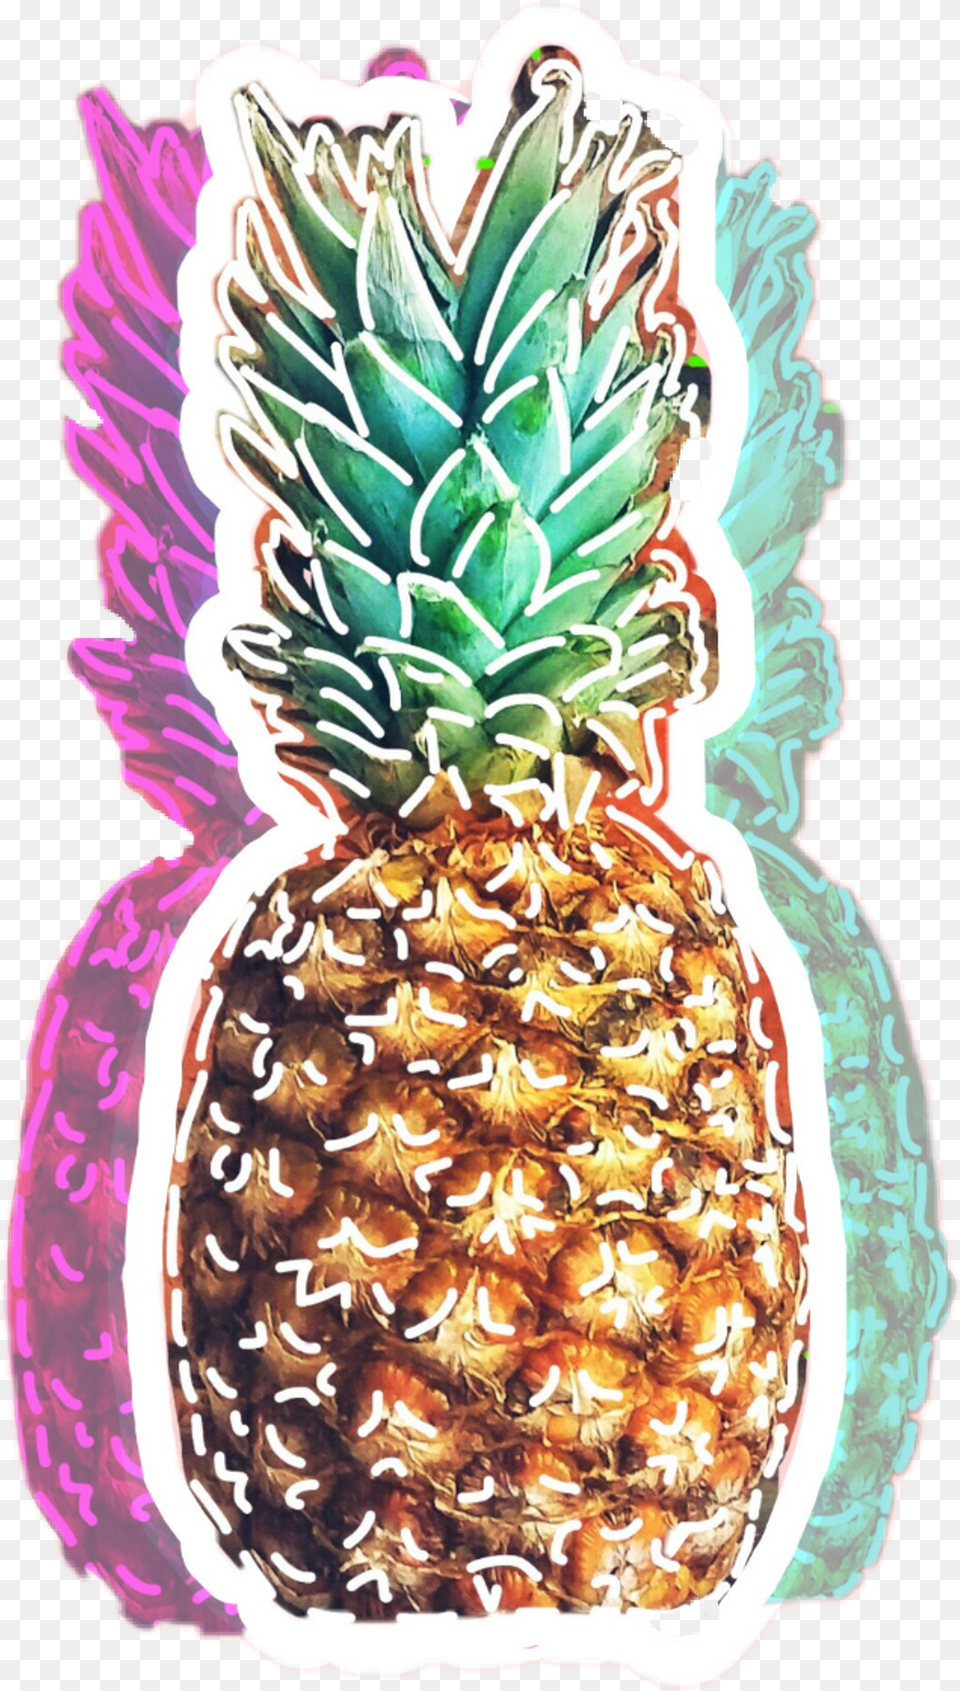 Pineapple Sticker Pineapple Full Size Image Transparent Pineapple Stickers, Food, Fruit, Plant, Produce Free Png Download